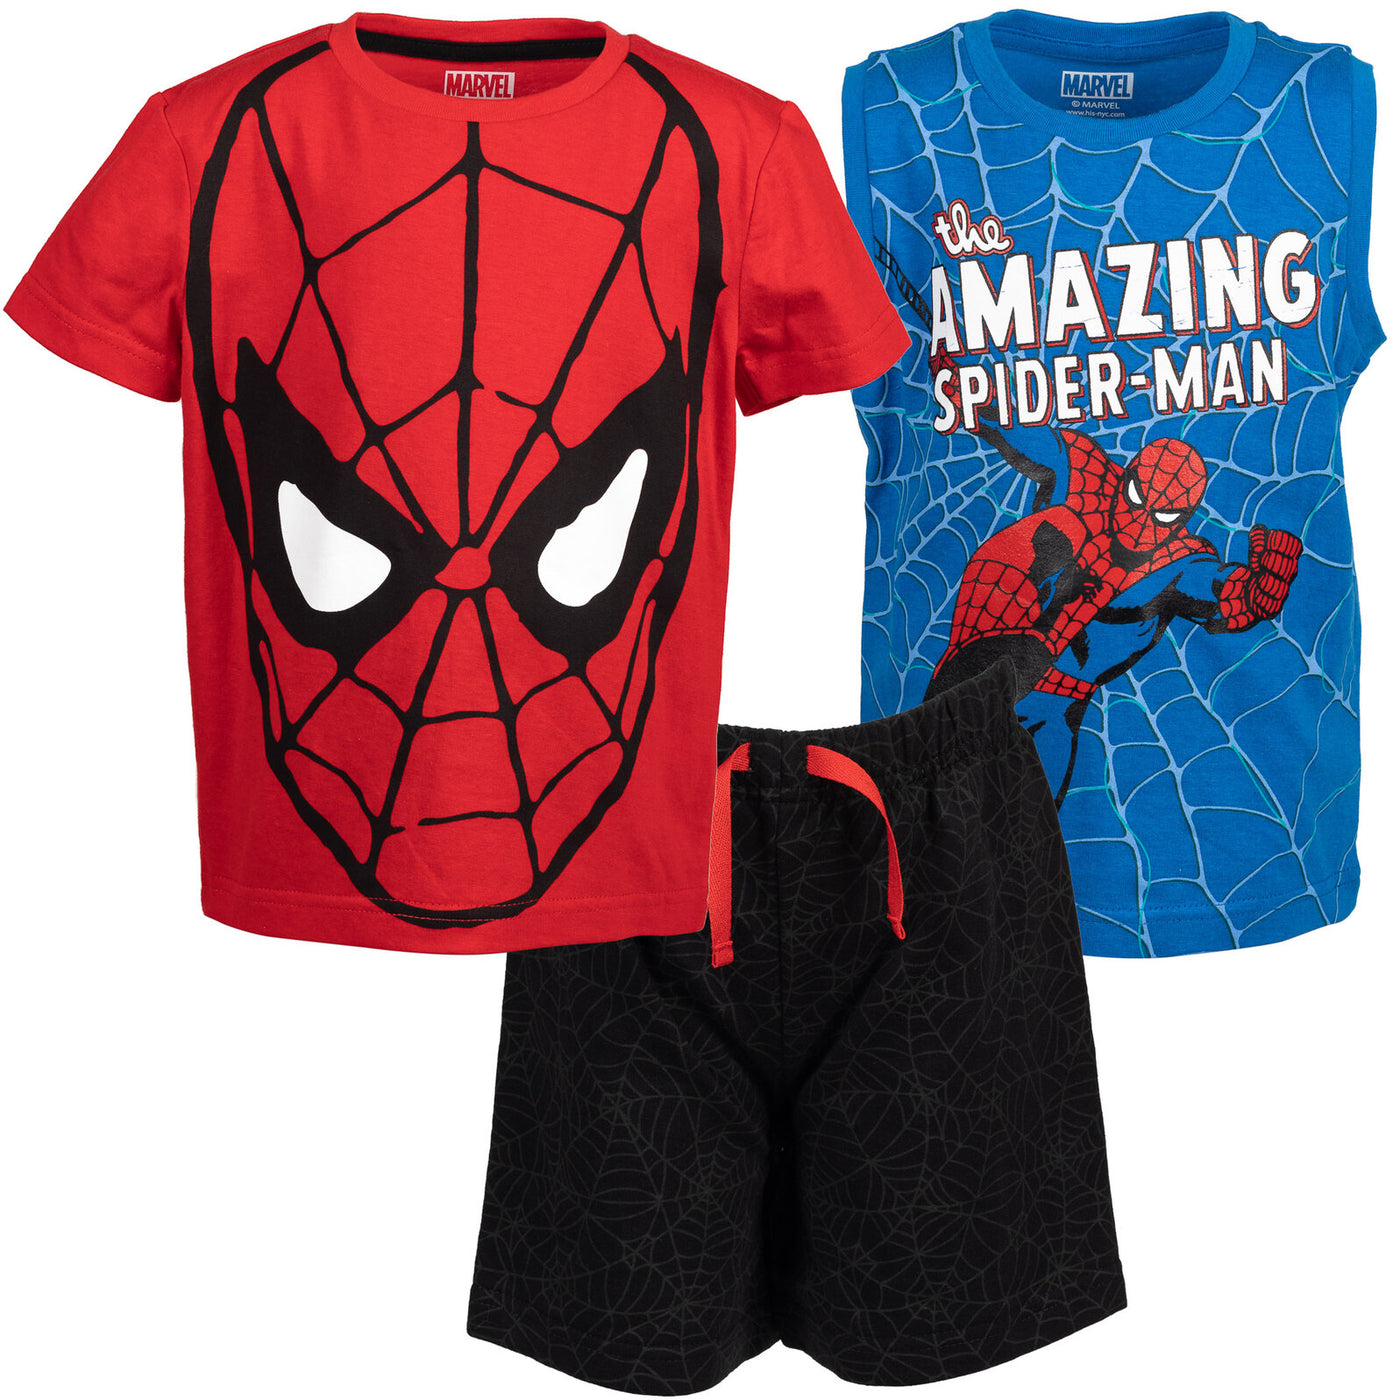 Marvel Avengers Spider-Man T-Shirt French Terry Tank Top and Shorts 3 Piece Outfit Set